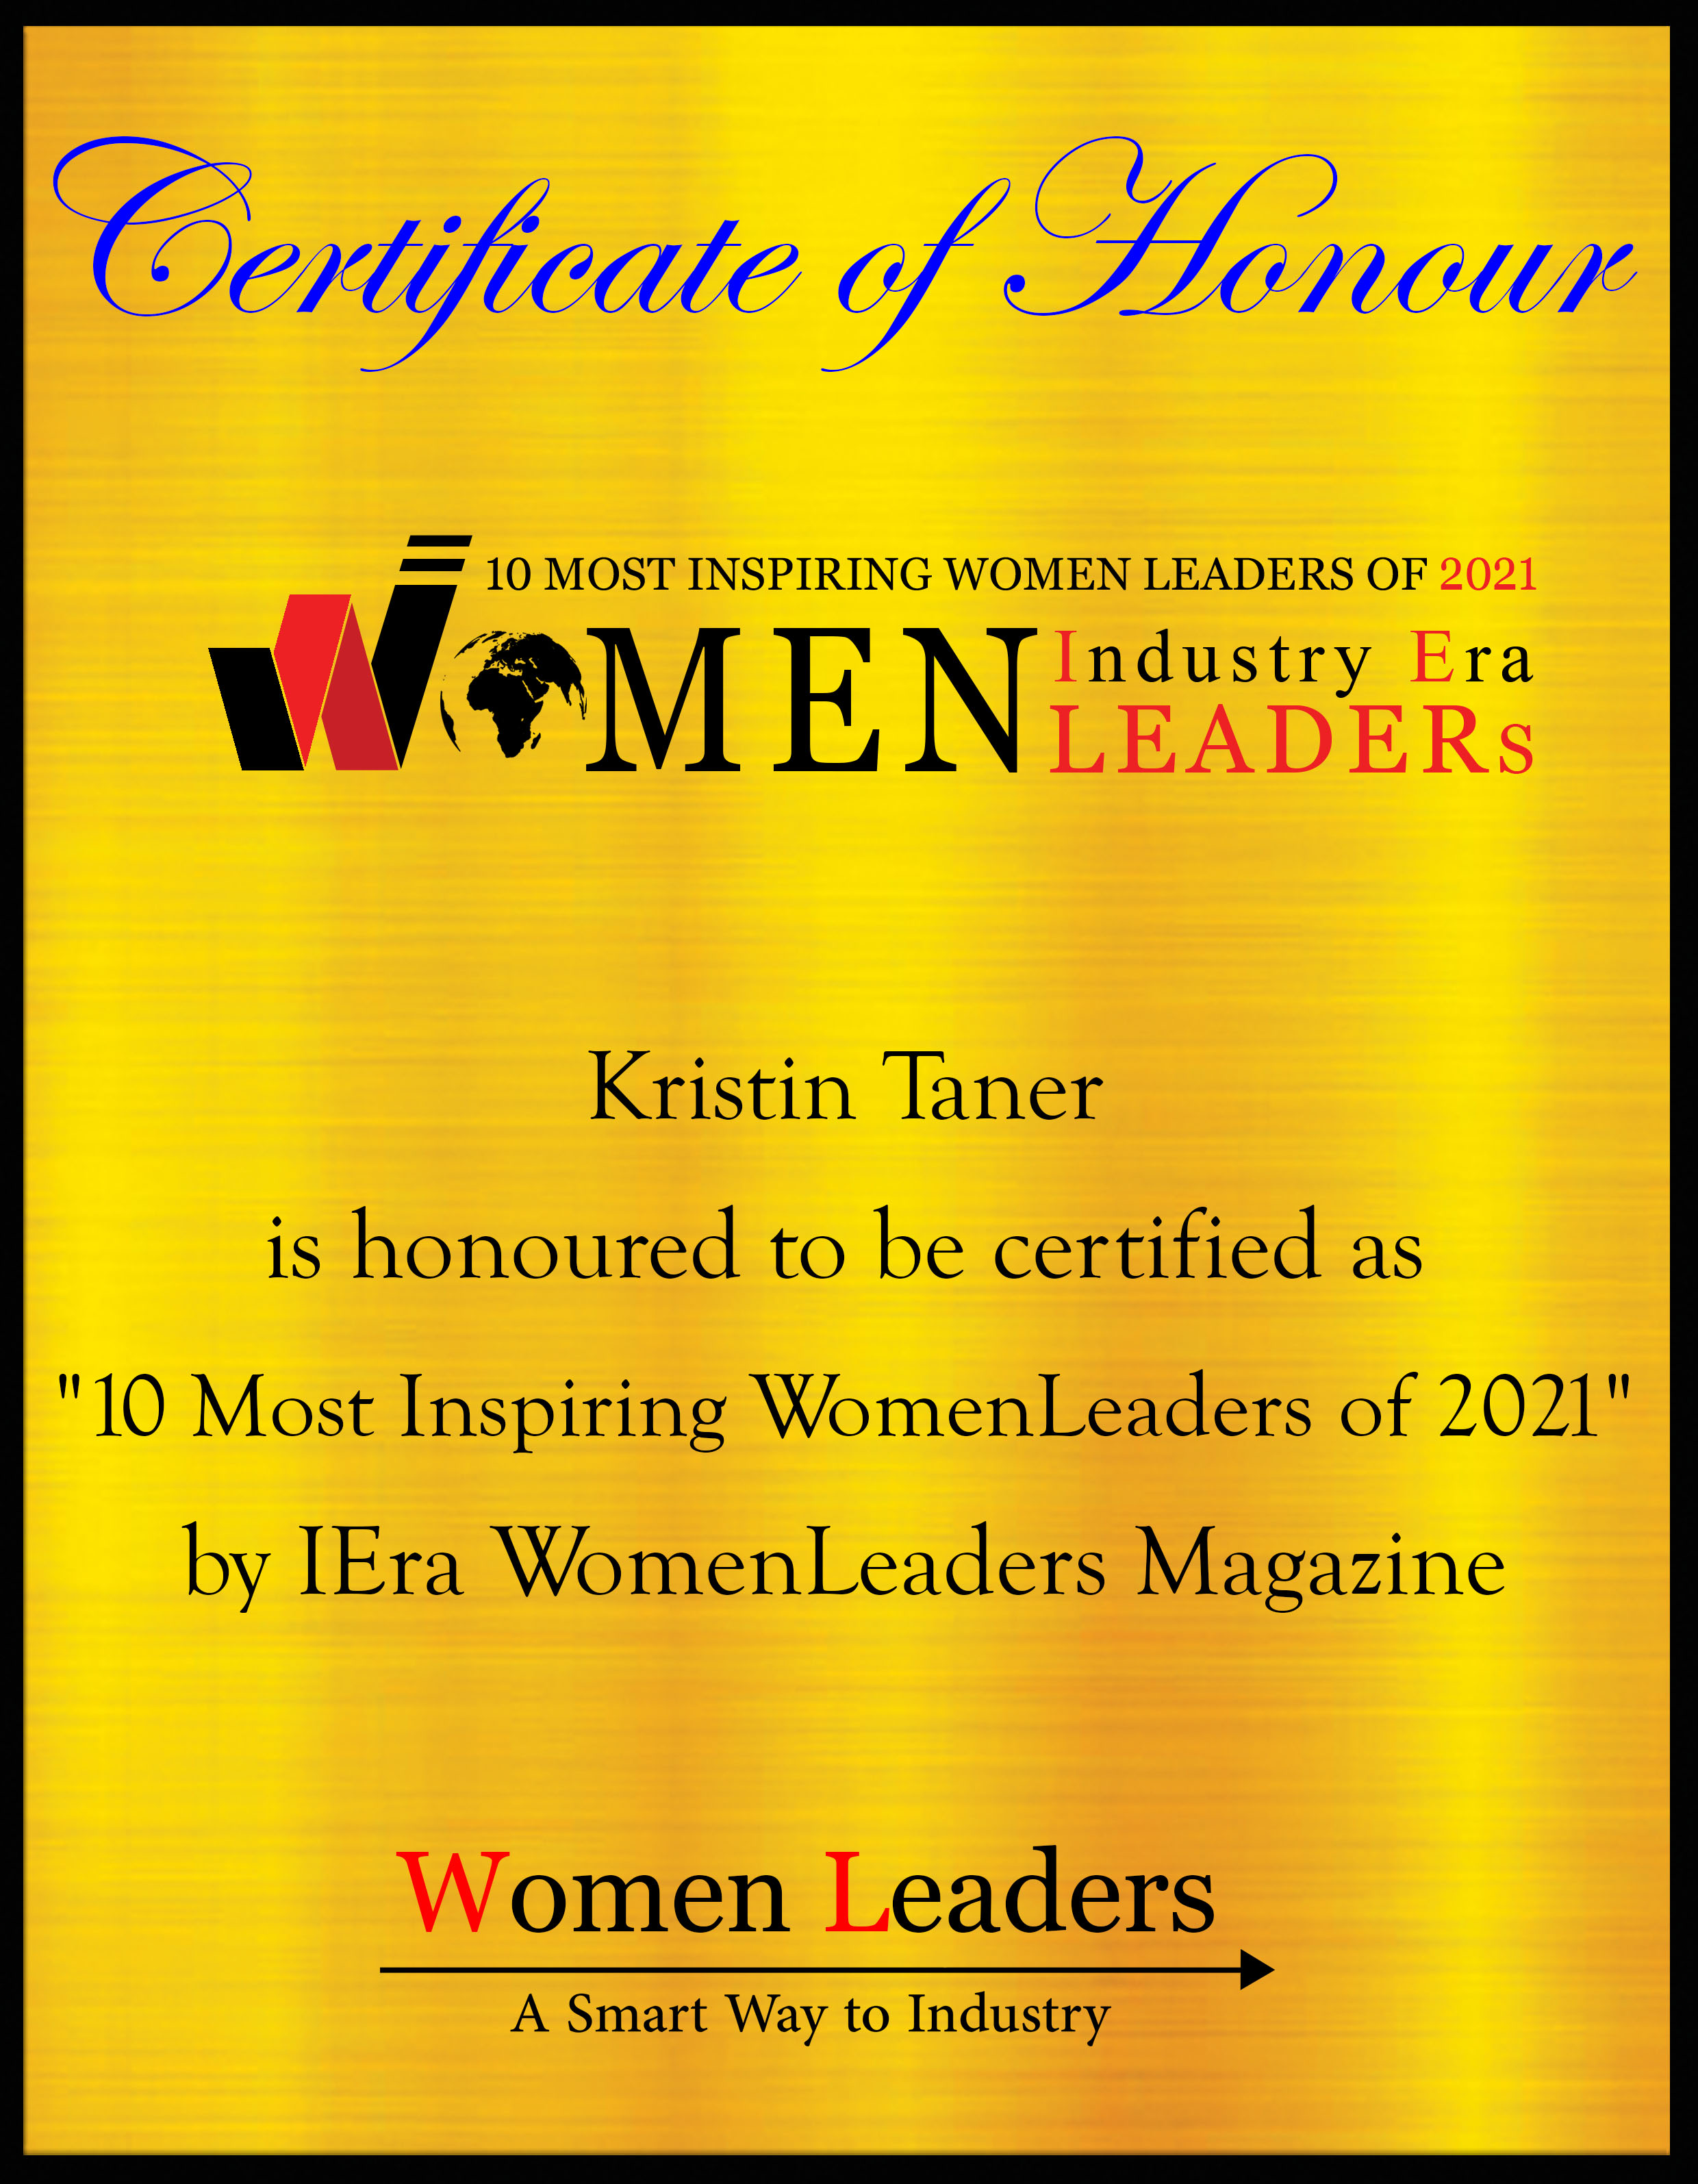 Kristin Taner, CMO of Managecore, Most Inspiring WomenLeaders of 2021